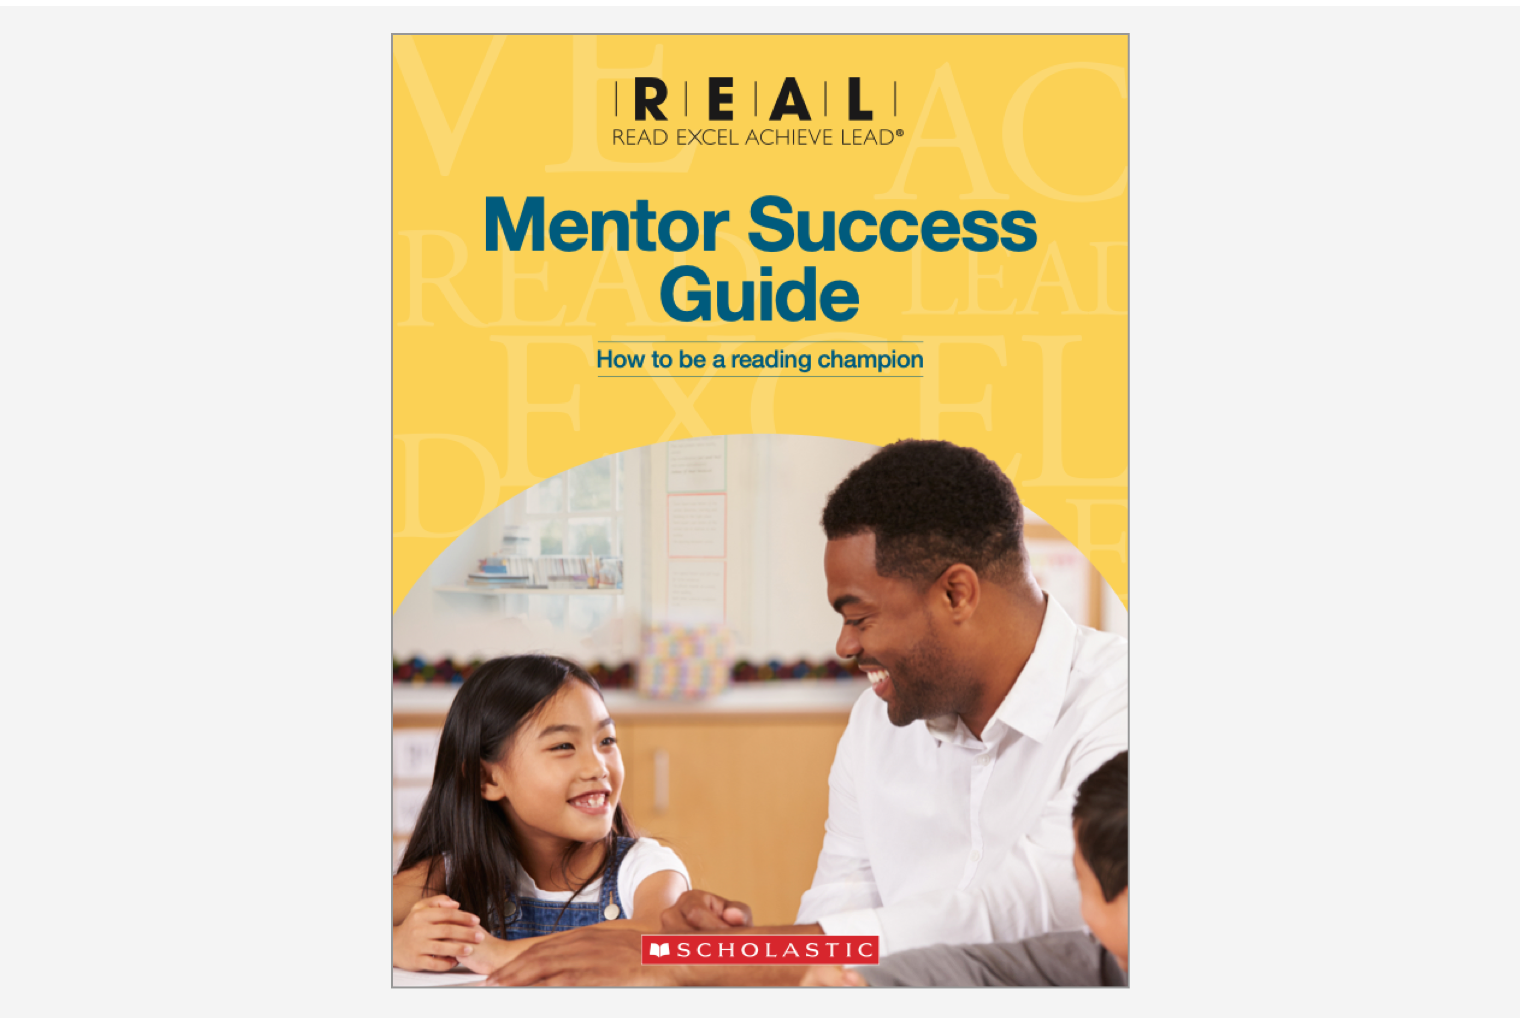 Scholastic REAL Mentor Success Guide